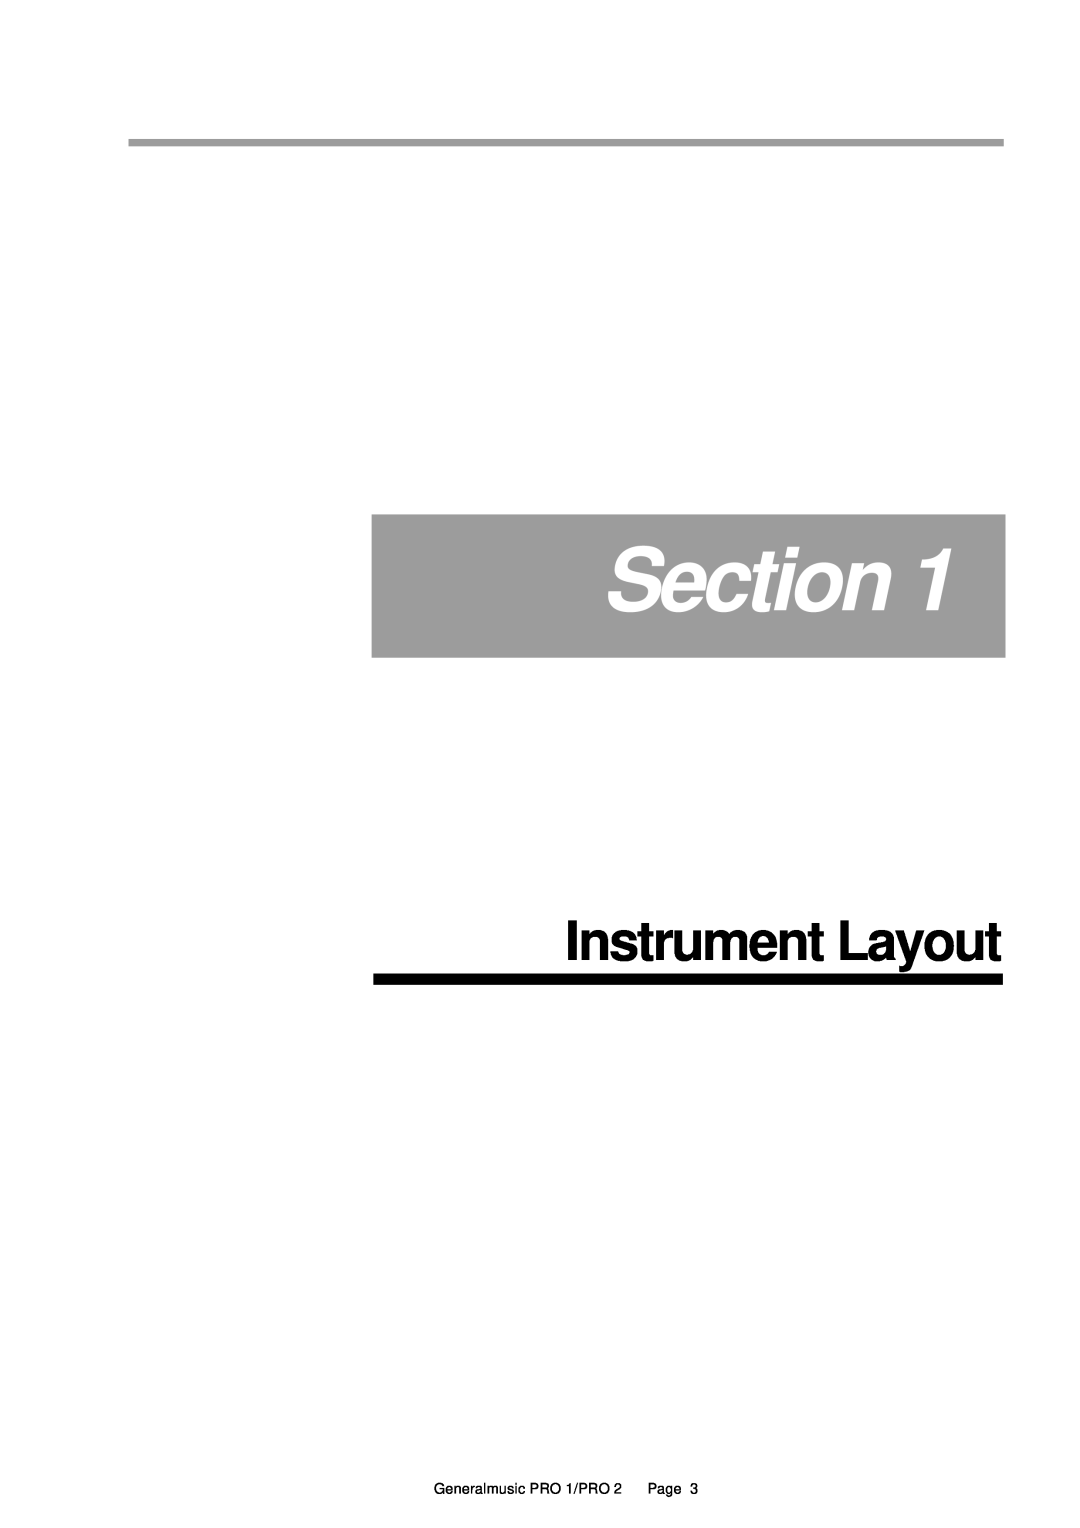 Peavey Pro 2, Pro 1 owner manual Section, Instrument Layout, Generalmusic PRO 1/PRO 2 Page 